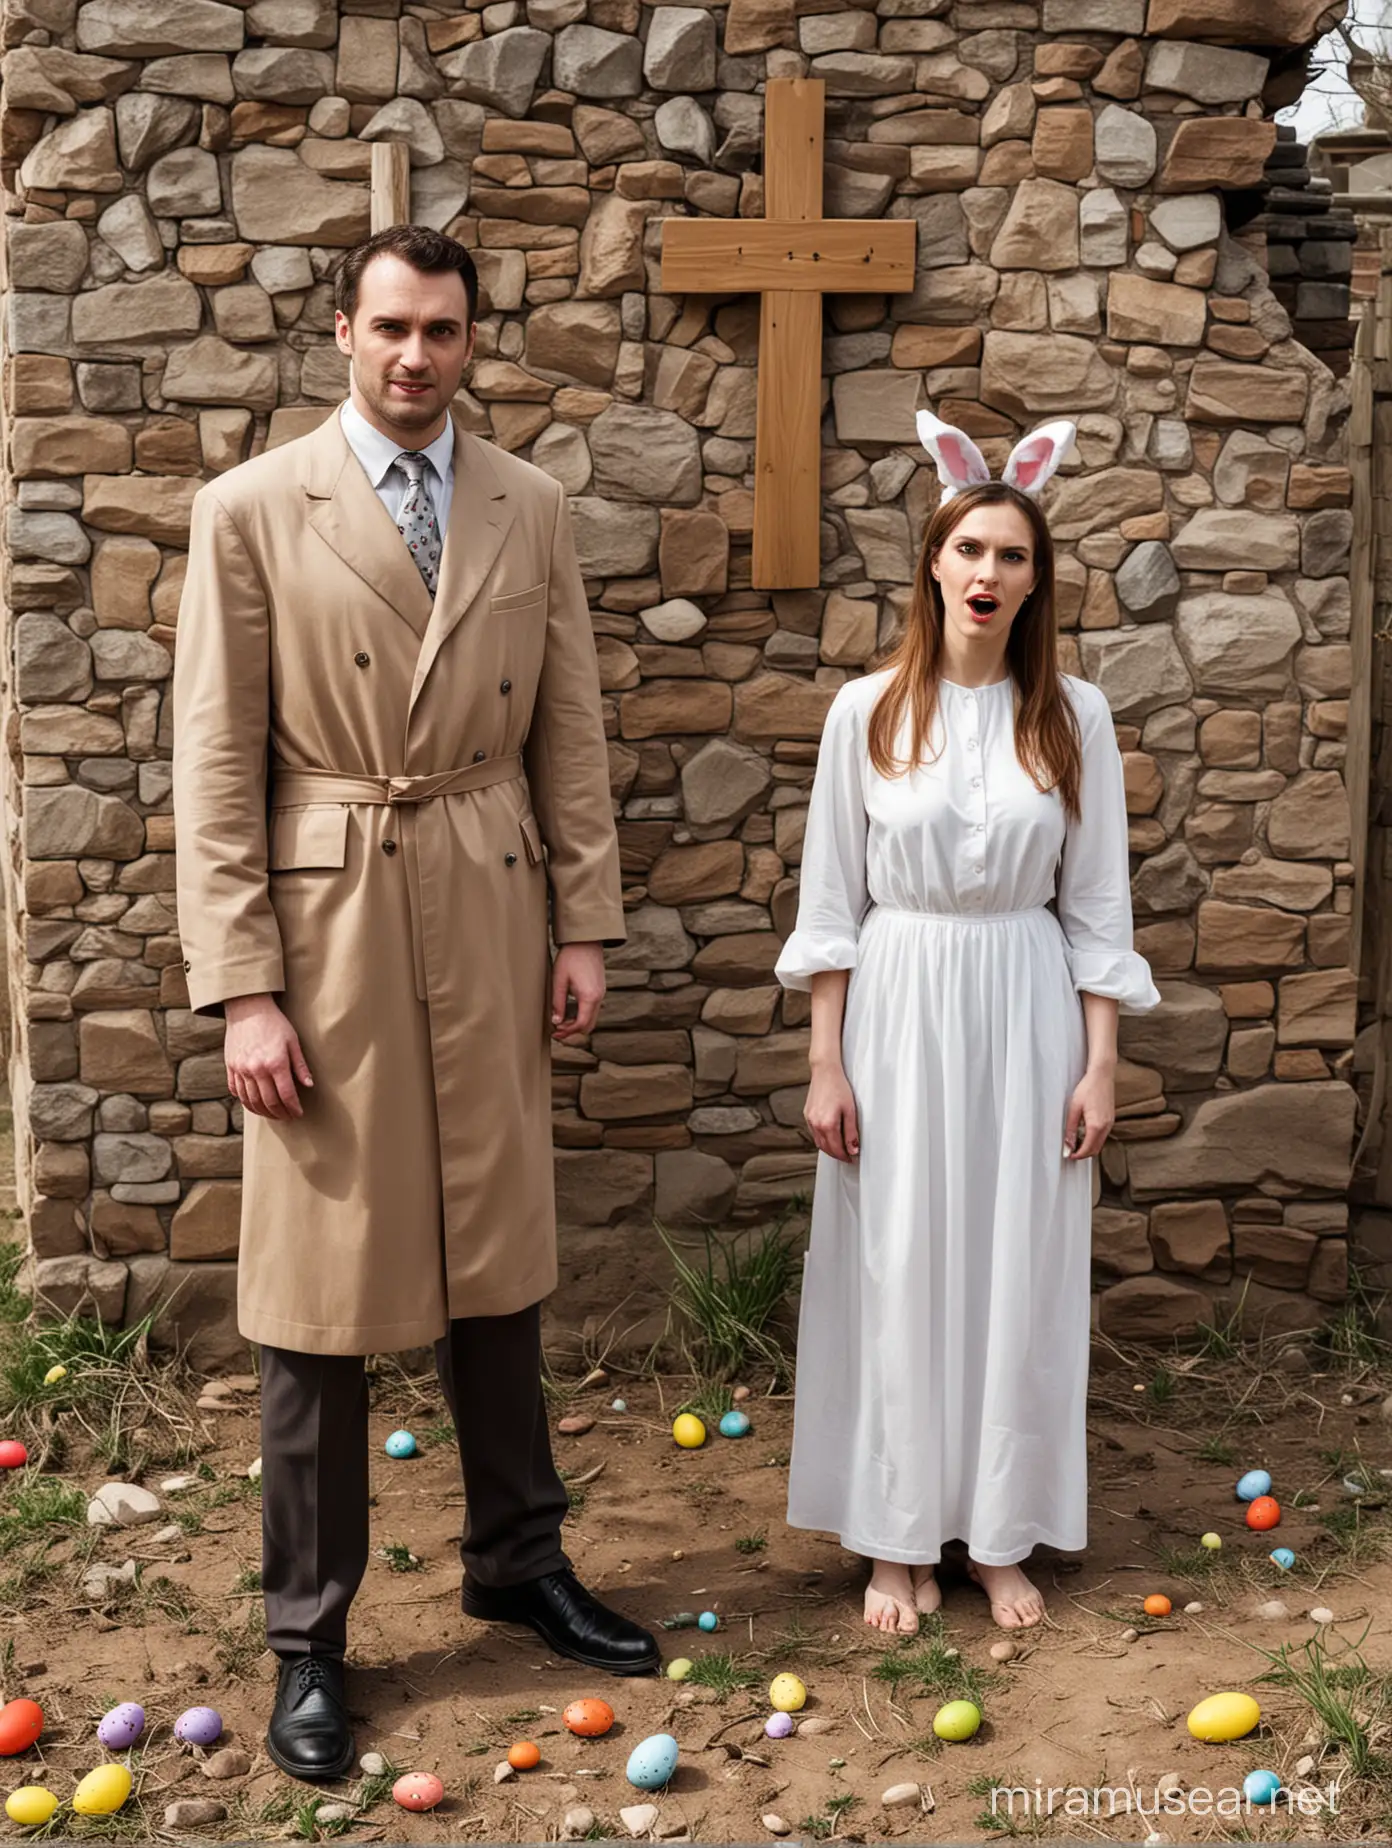 Evil man and woman ruins Easter Sunday.